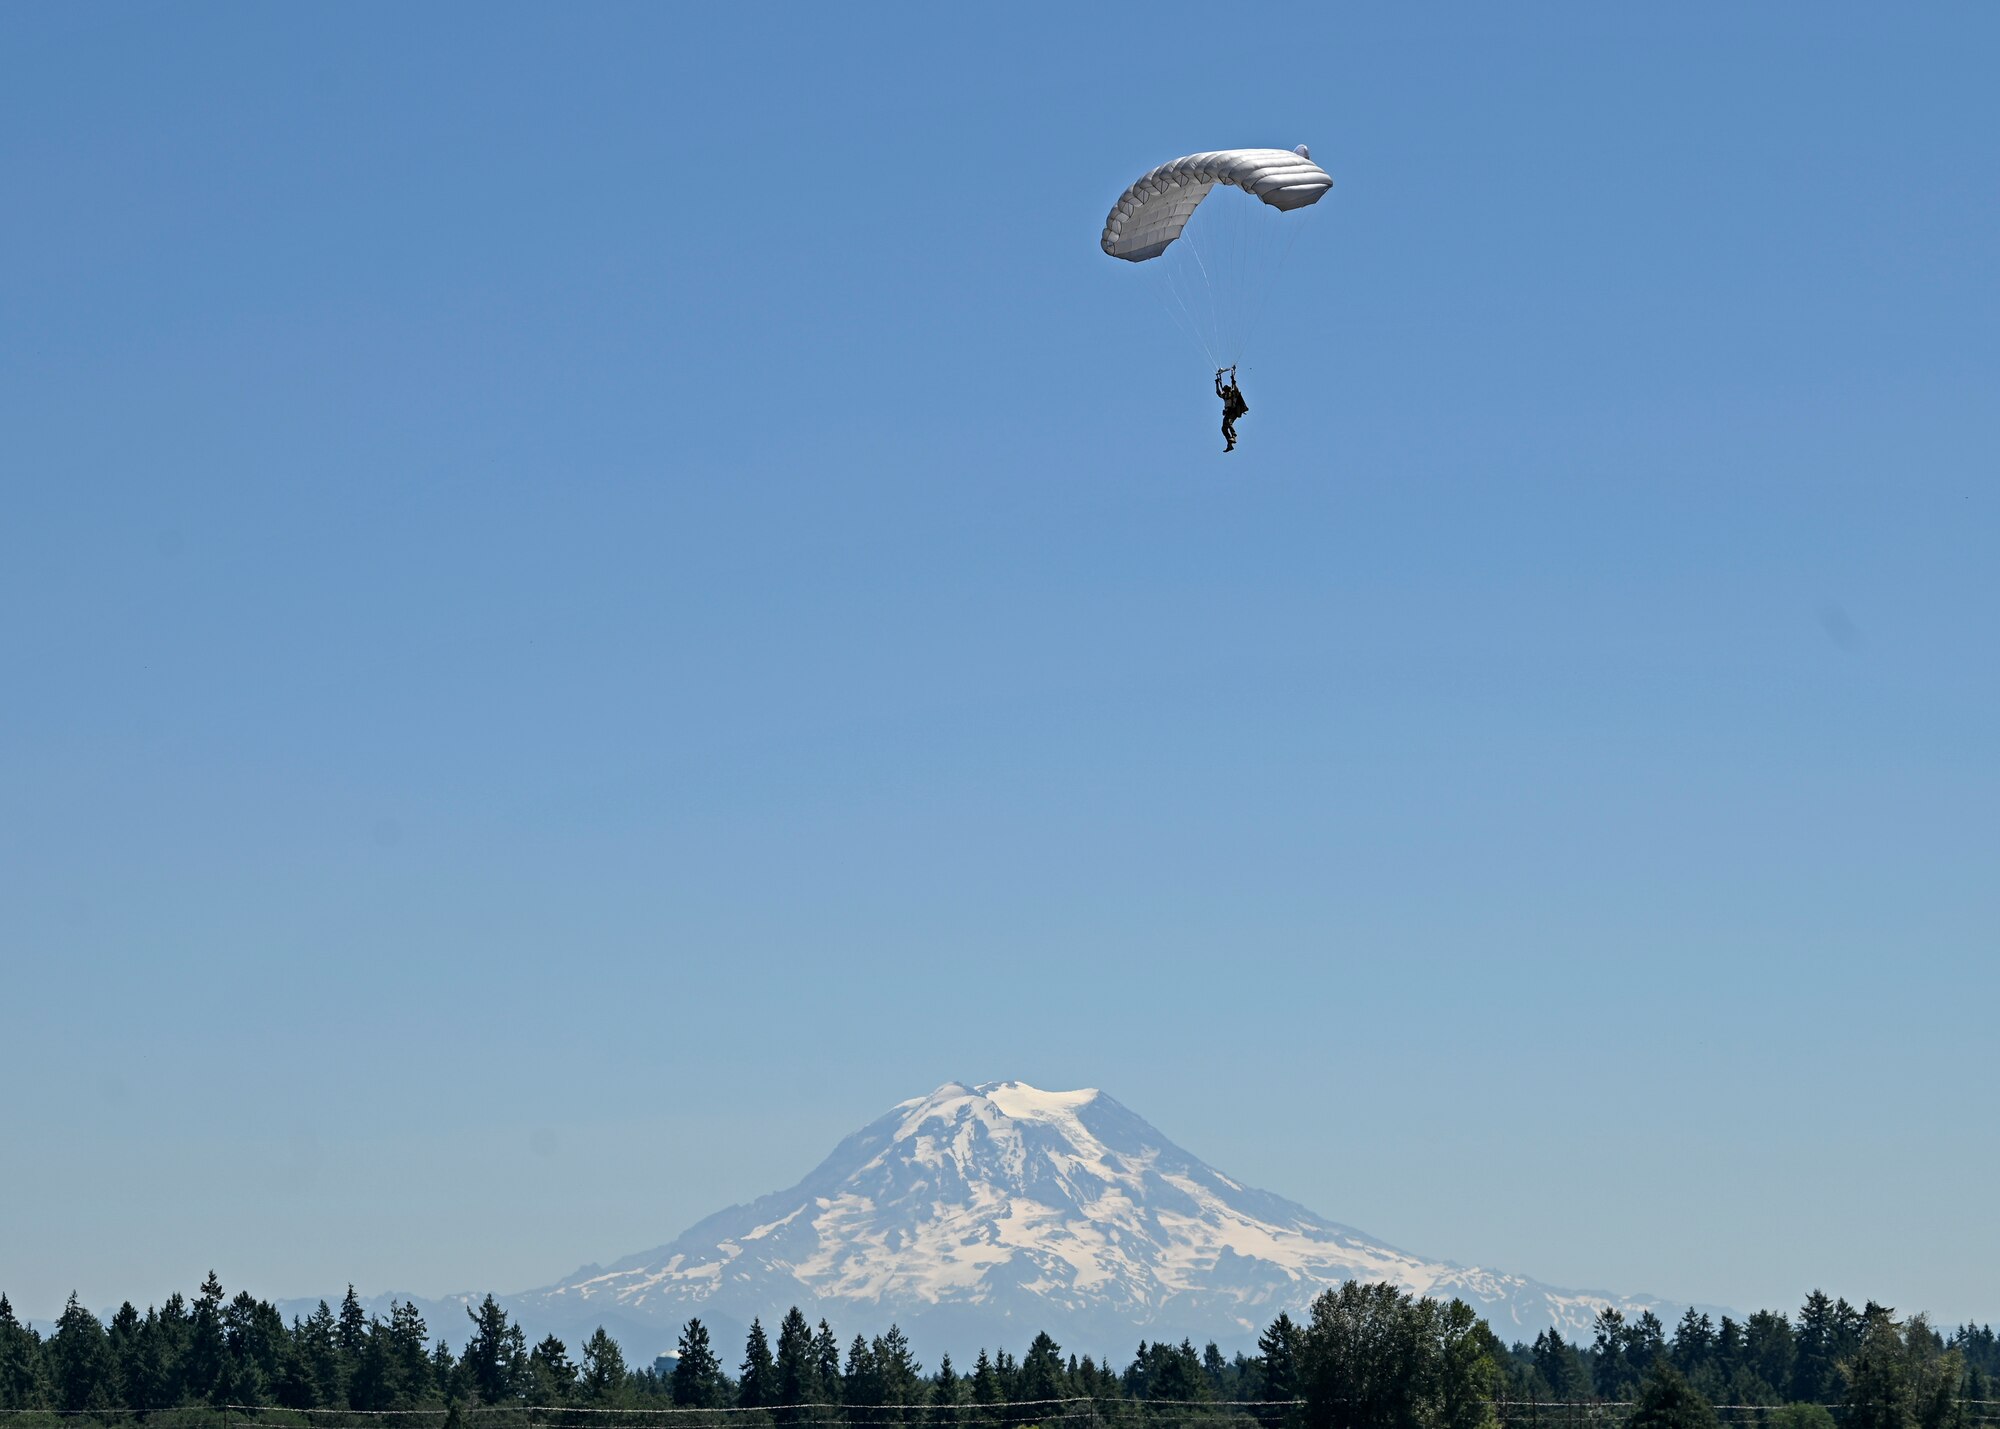 A U.S. Air Force Airman with the 22nd Special Tactics Squadron performs a freefall jump out of a C-17 Globemaster III assigned to the 62d Airlift Wing above the McChord Field flightline in preparation for the Joint Base Lewis-McChord Airshow and Warrior Expo at JBLM, Washington, July 14, 2023. The mission of the JAWE is to foster goodwill to educate and familiarize attendees with the people, mission, and equipment of the Air Force, Army, and other Armed Services while continuing to provide installation-wide mission support. (U.S. Air Force photo by Senior Airman Callie Norton)